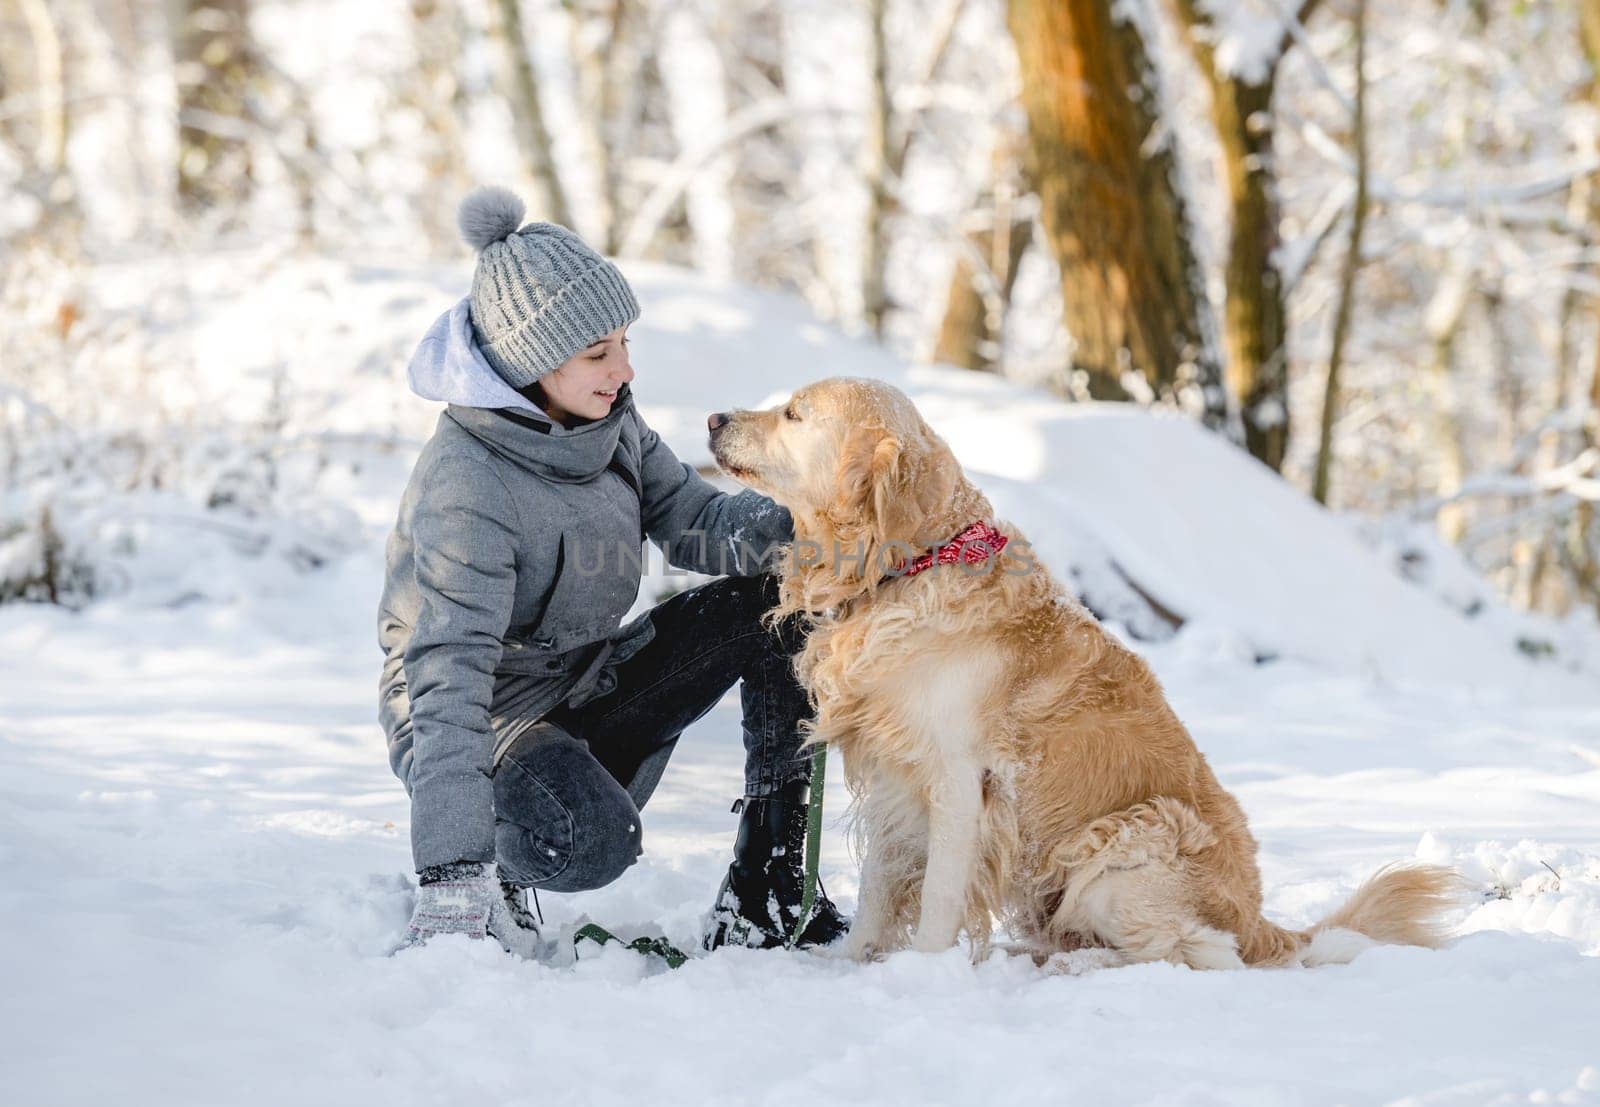 Teenage Girl And Golden Retriever In Winter Forest by tan4ikk1